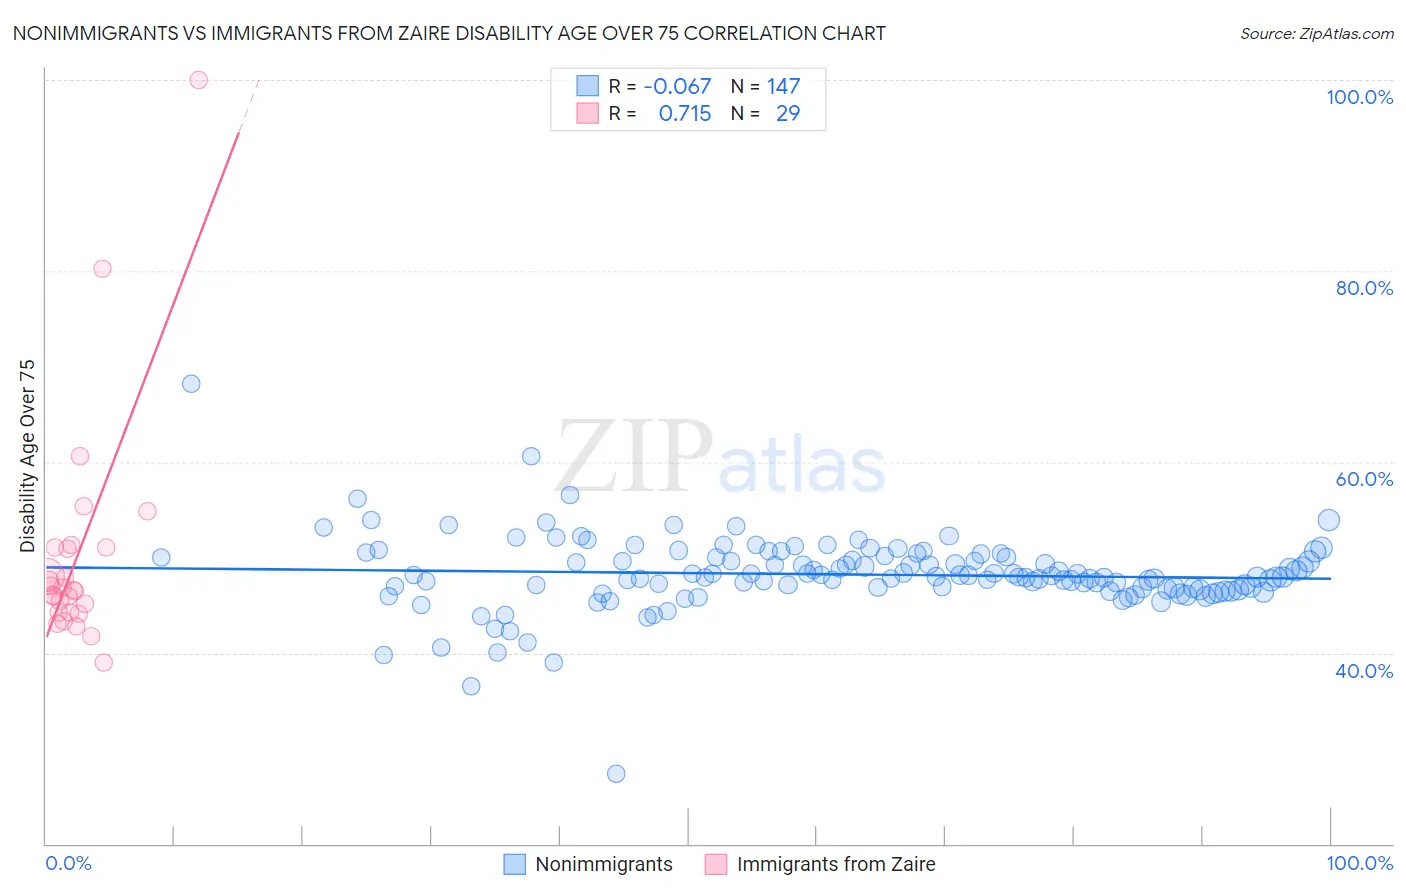 Nonimmigrants vs Immigrants from Zaire Disability Age Over 75